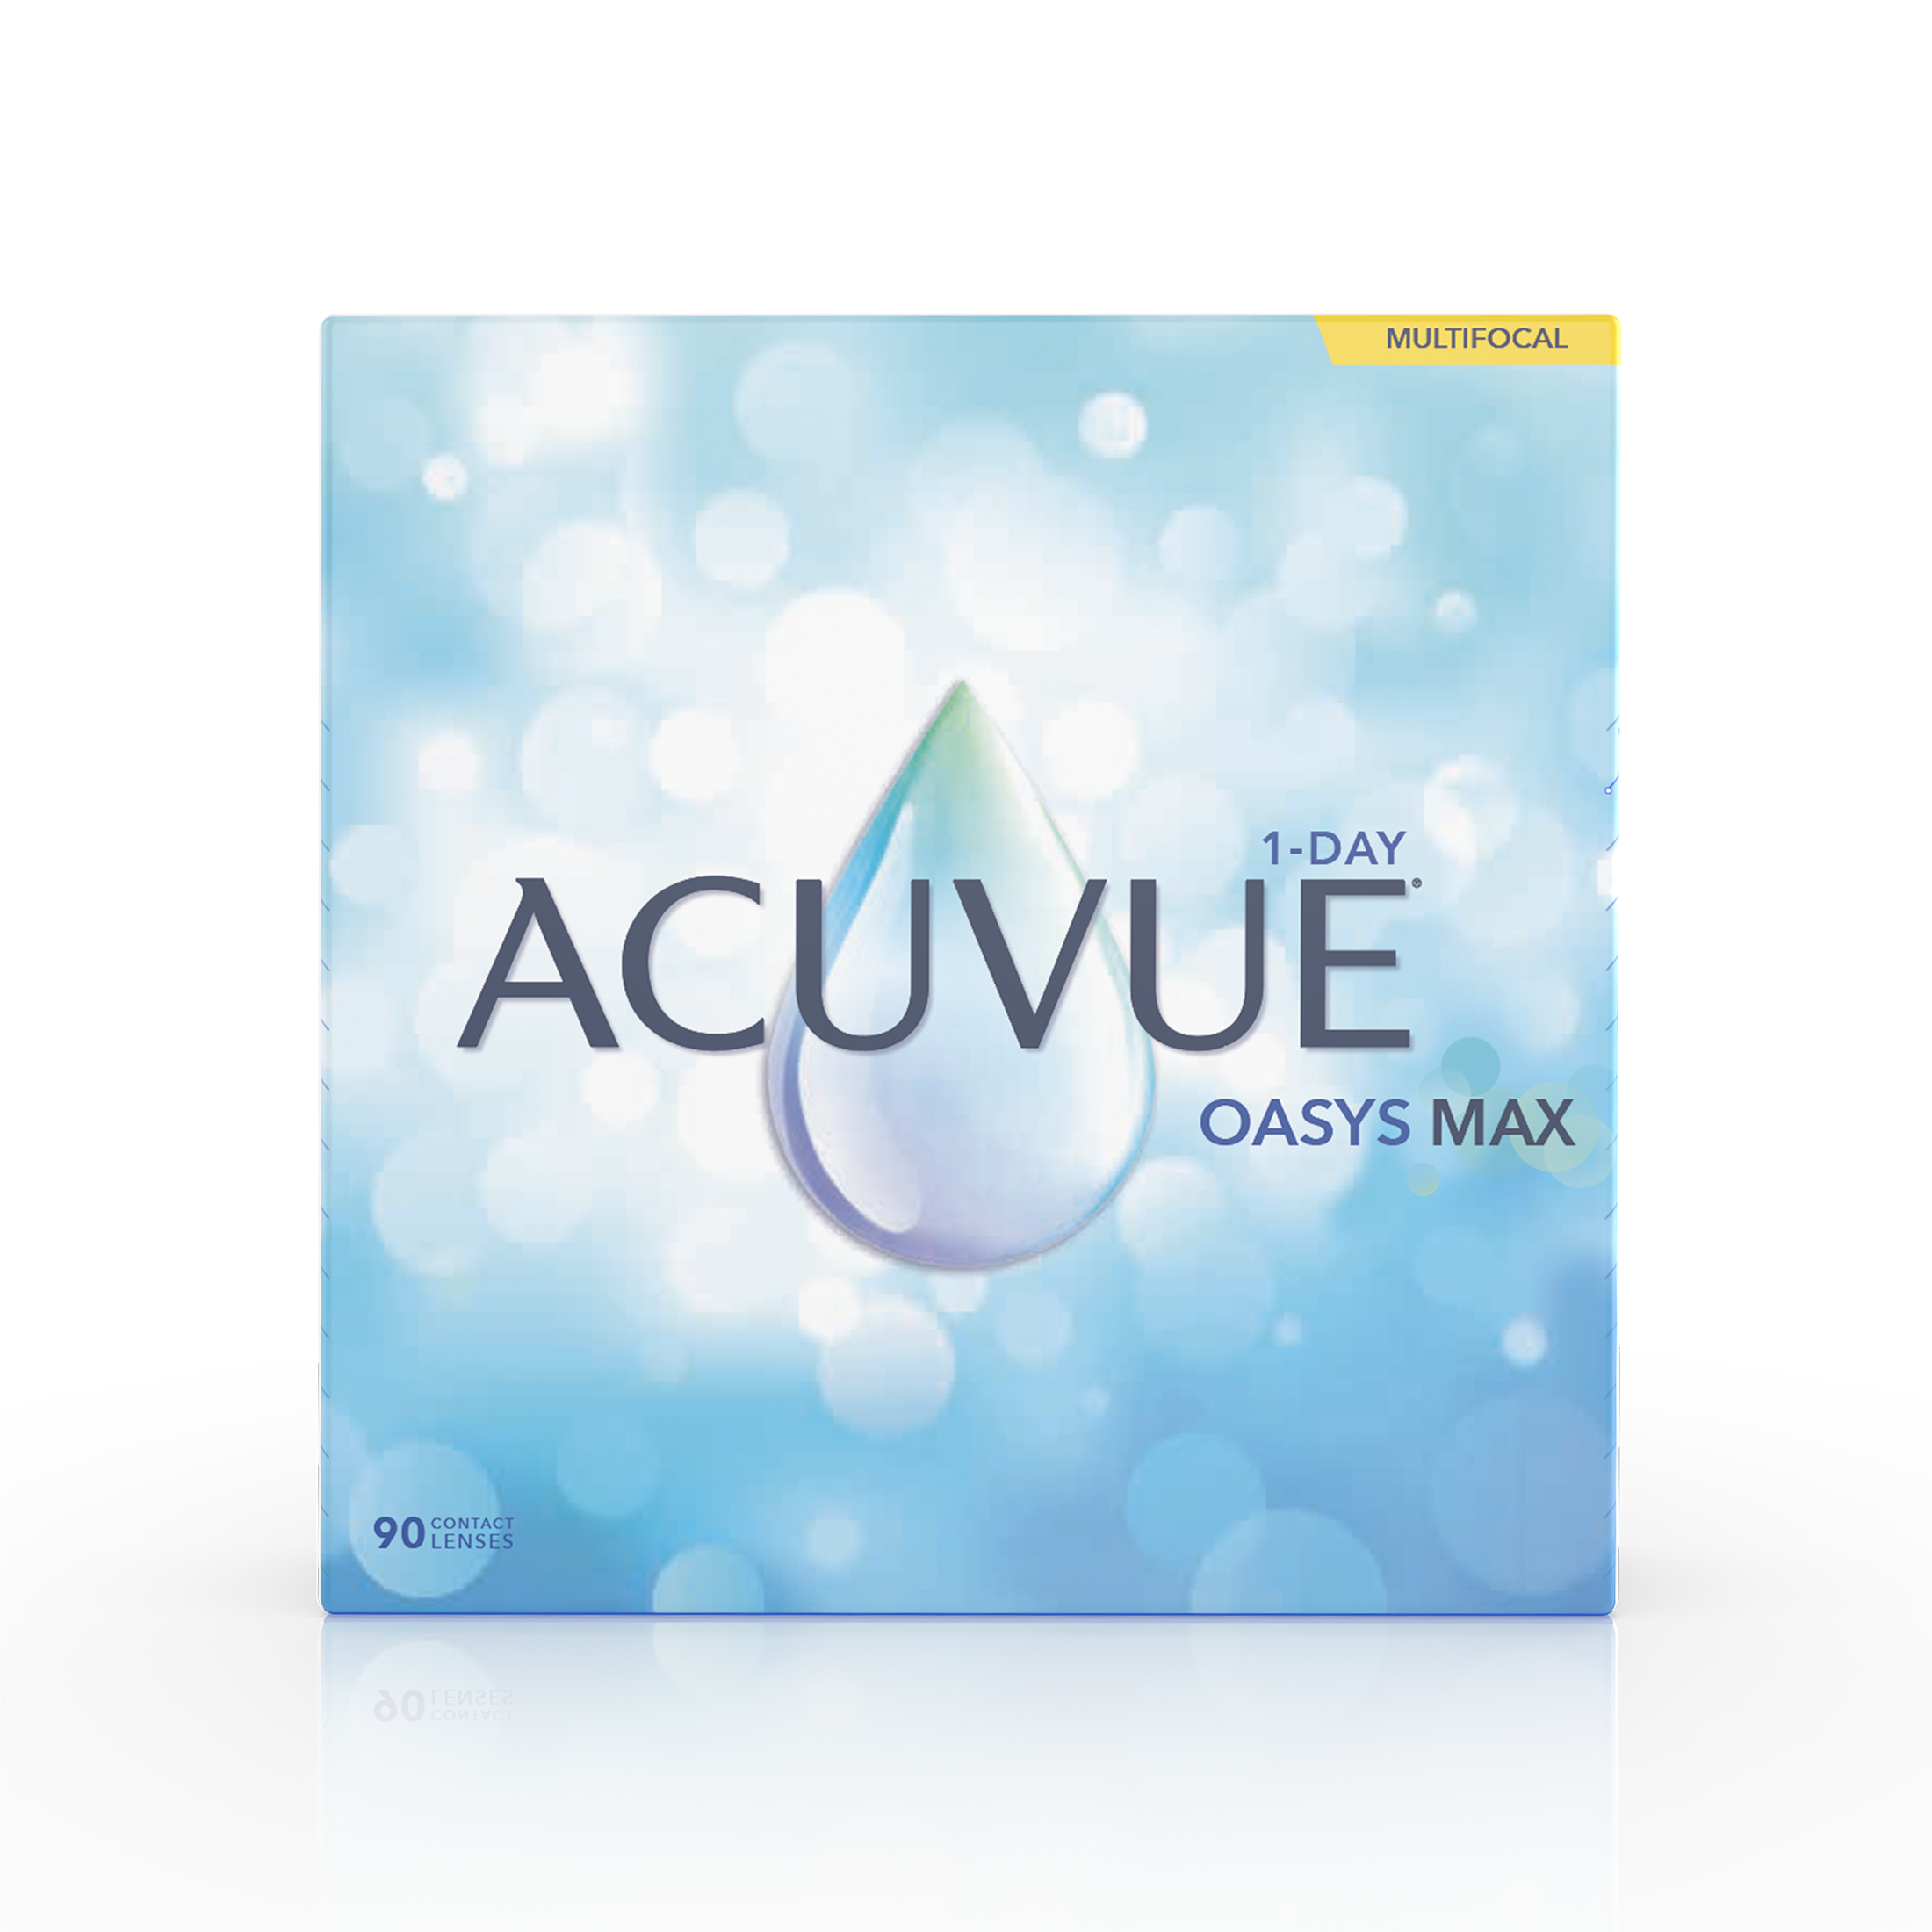 ACUVUE OASYS MAX 1 DAY MULTIFOCAL (90 PACK)